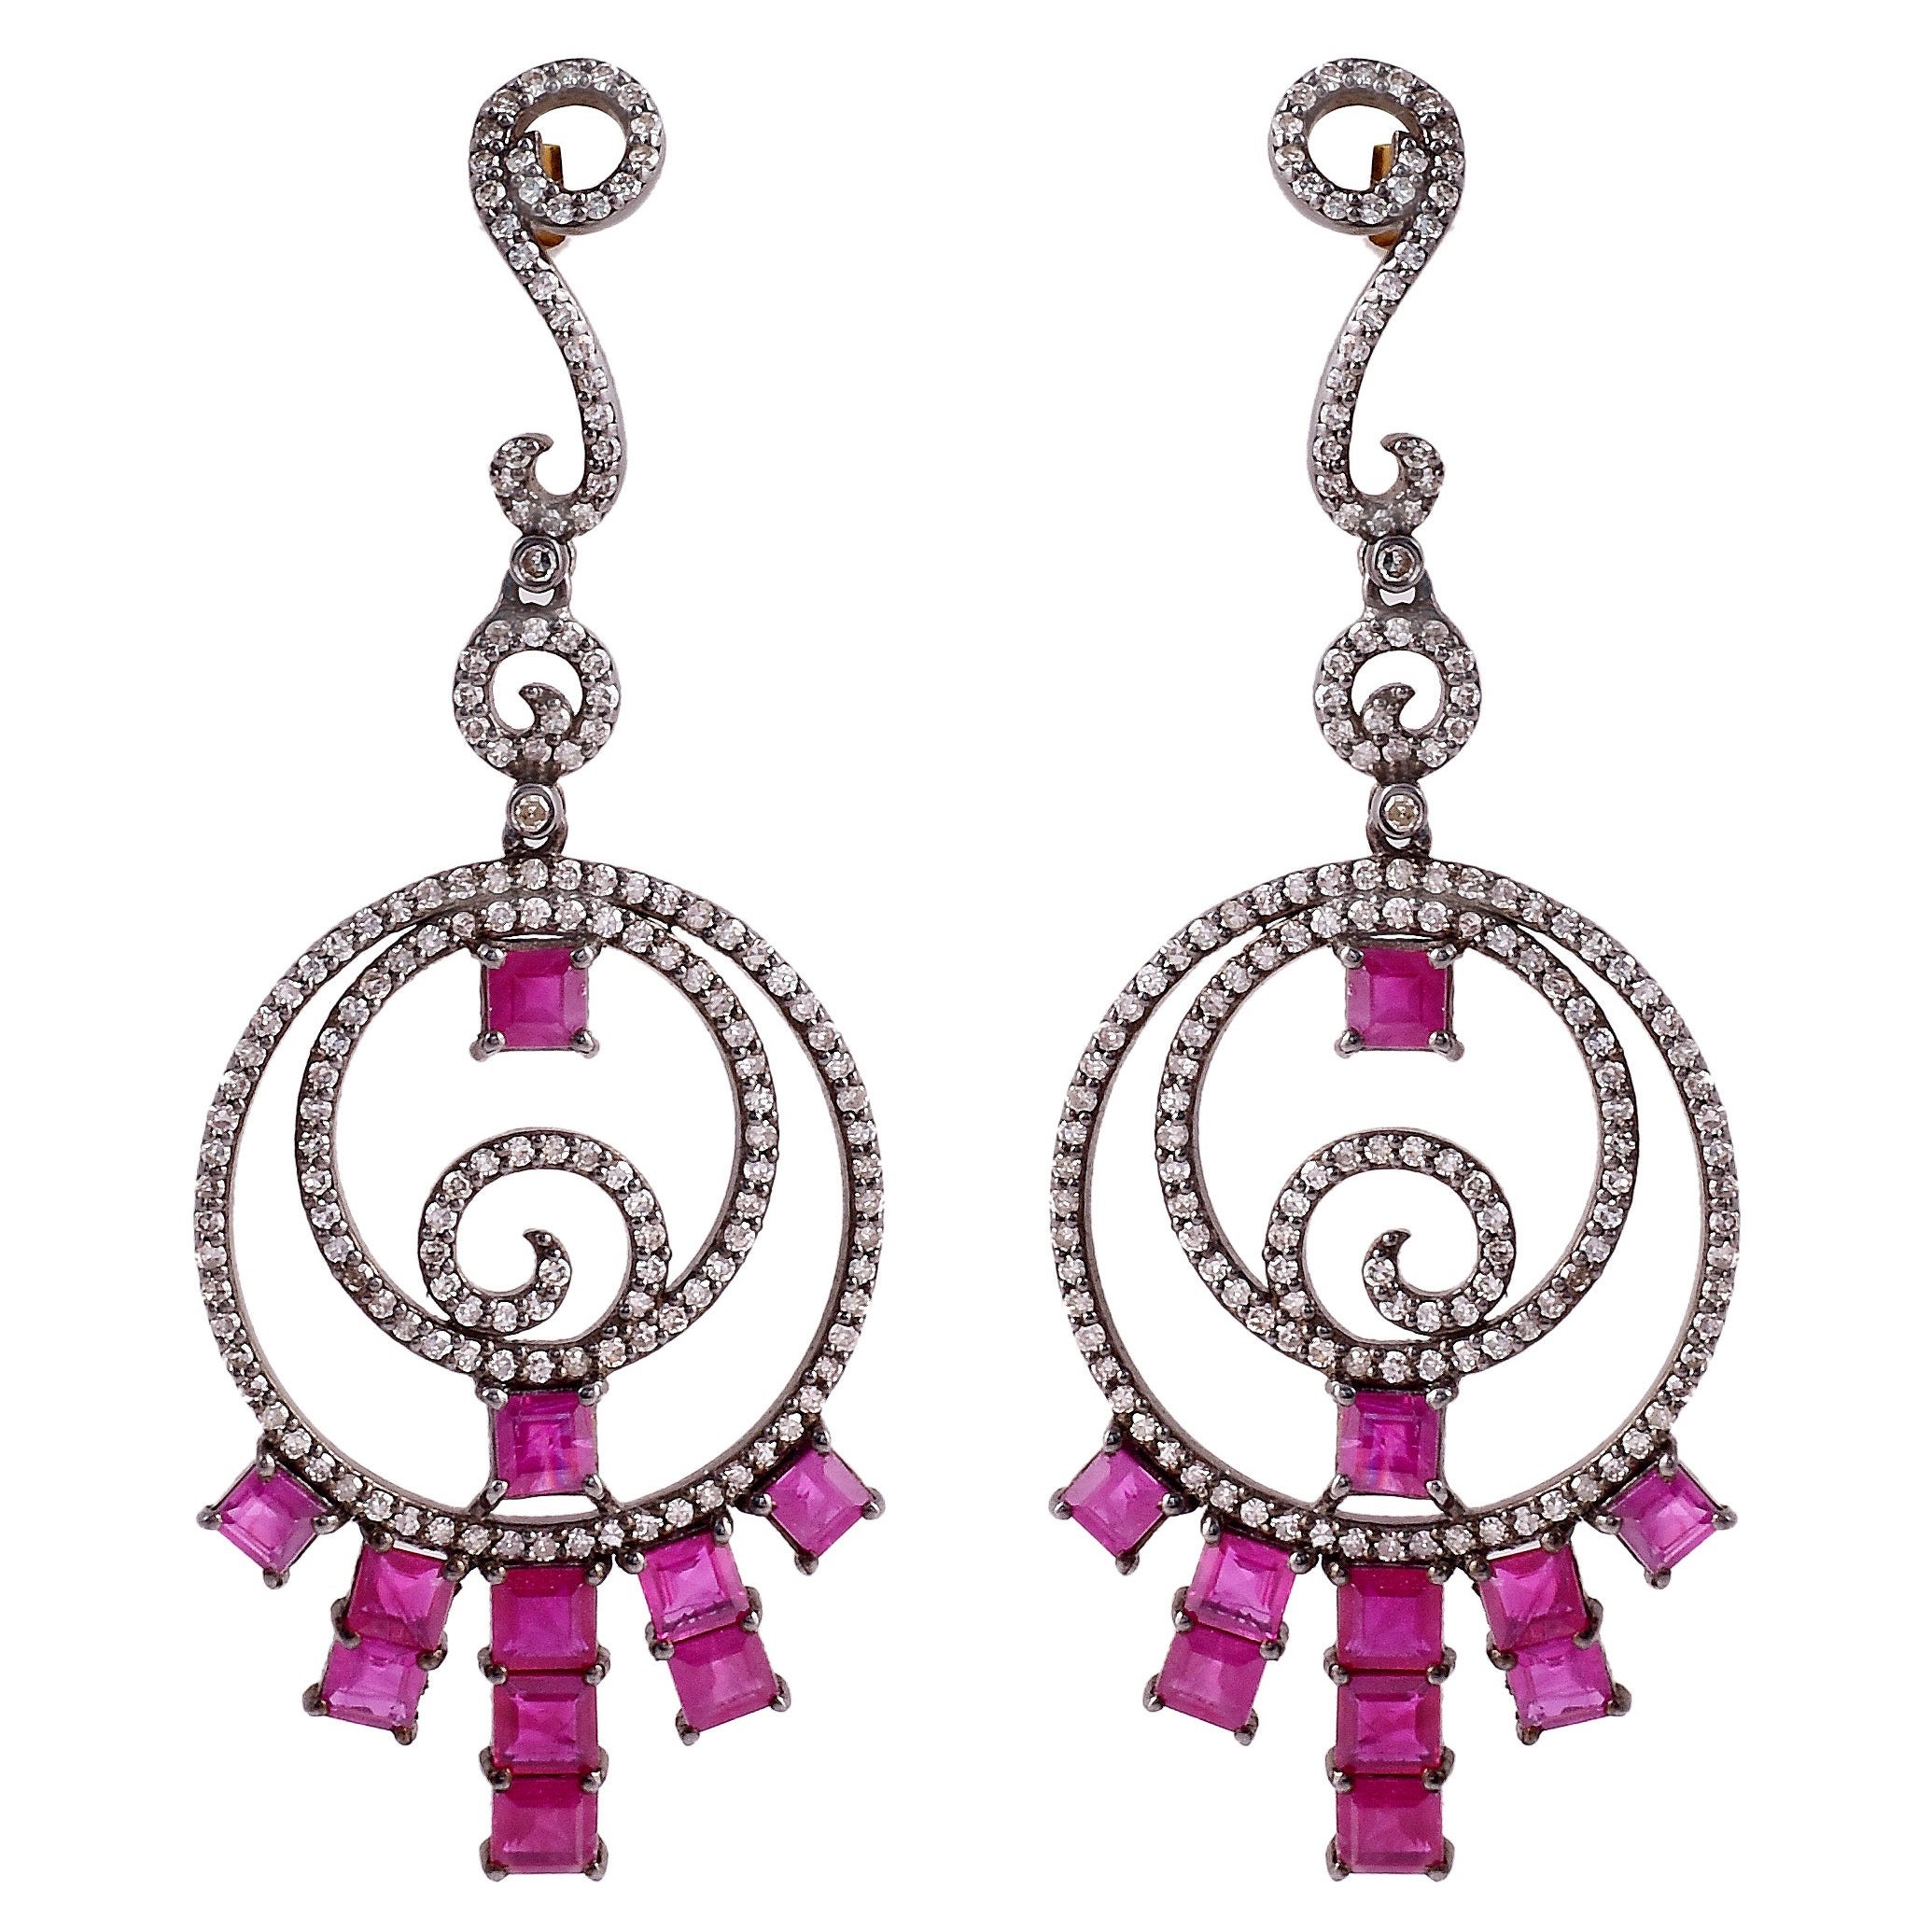 9.49 Carat Diamond and Ruby Victorian Style Drop Earrings